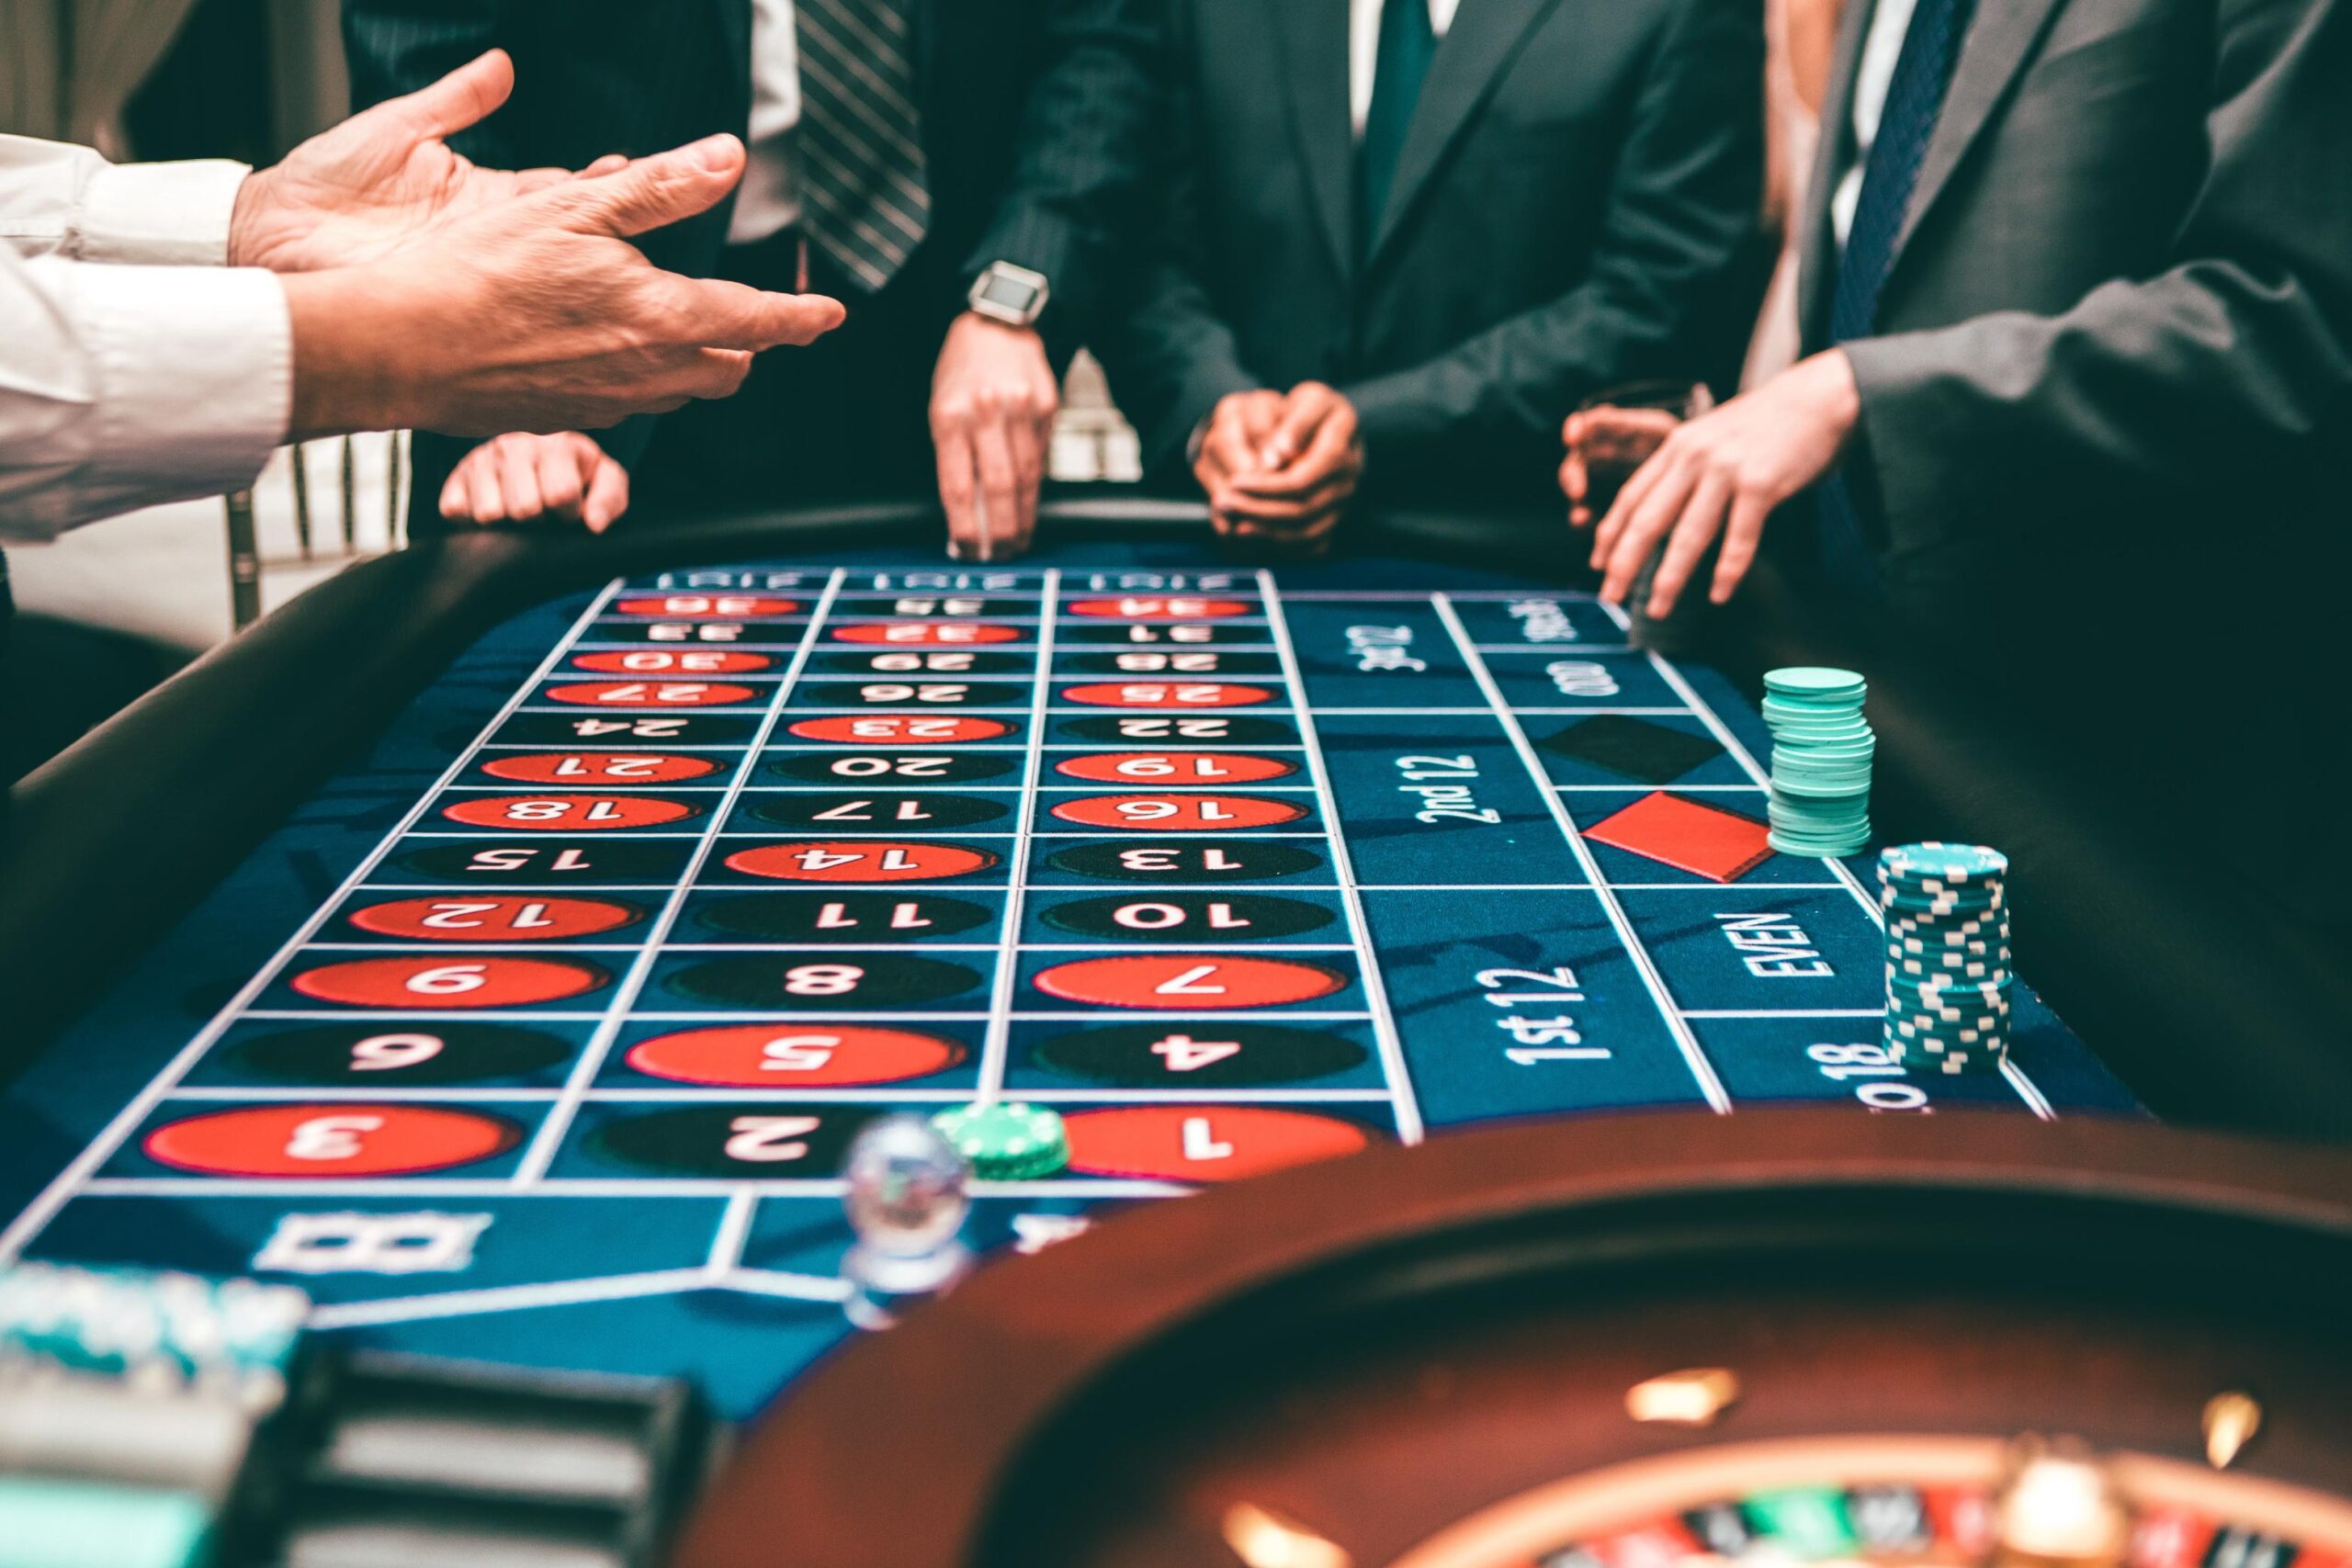 What are the top 10 biggest investment trends in the gambling industry this year?